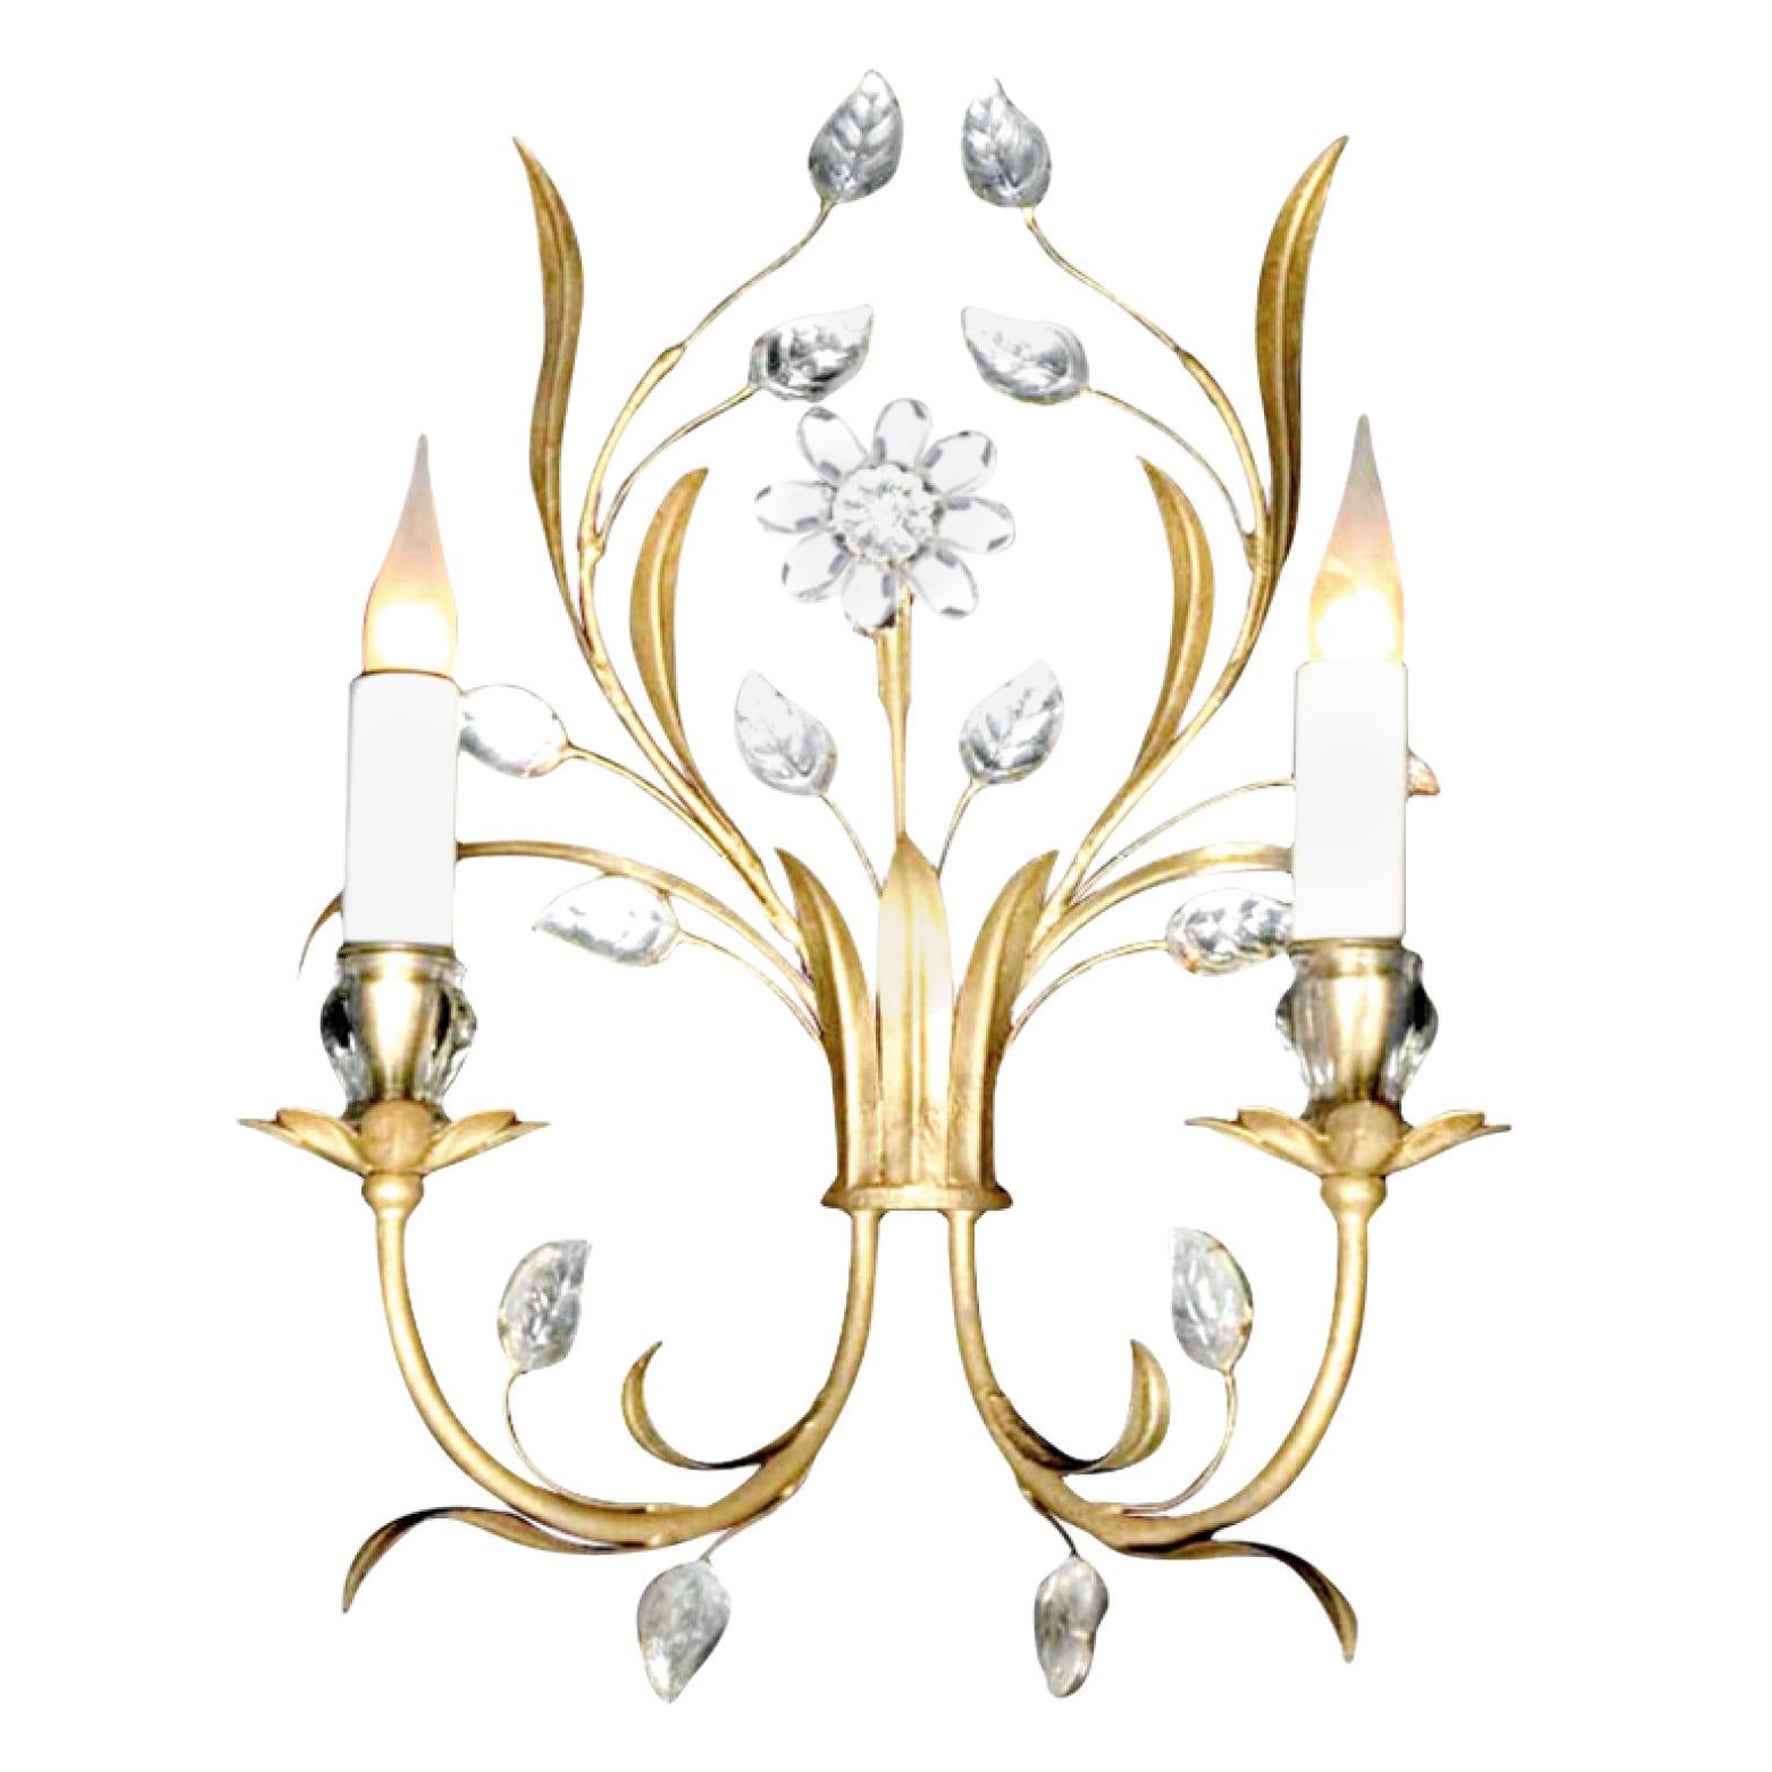 Certified Maison Bagues Sconce, Iron and Crystal 2 Lights #00167 For Sale